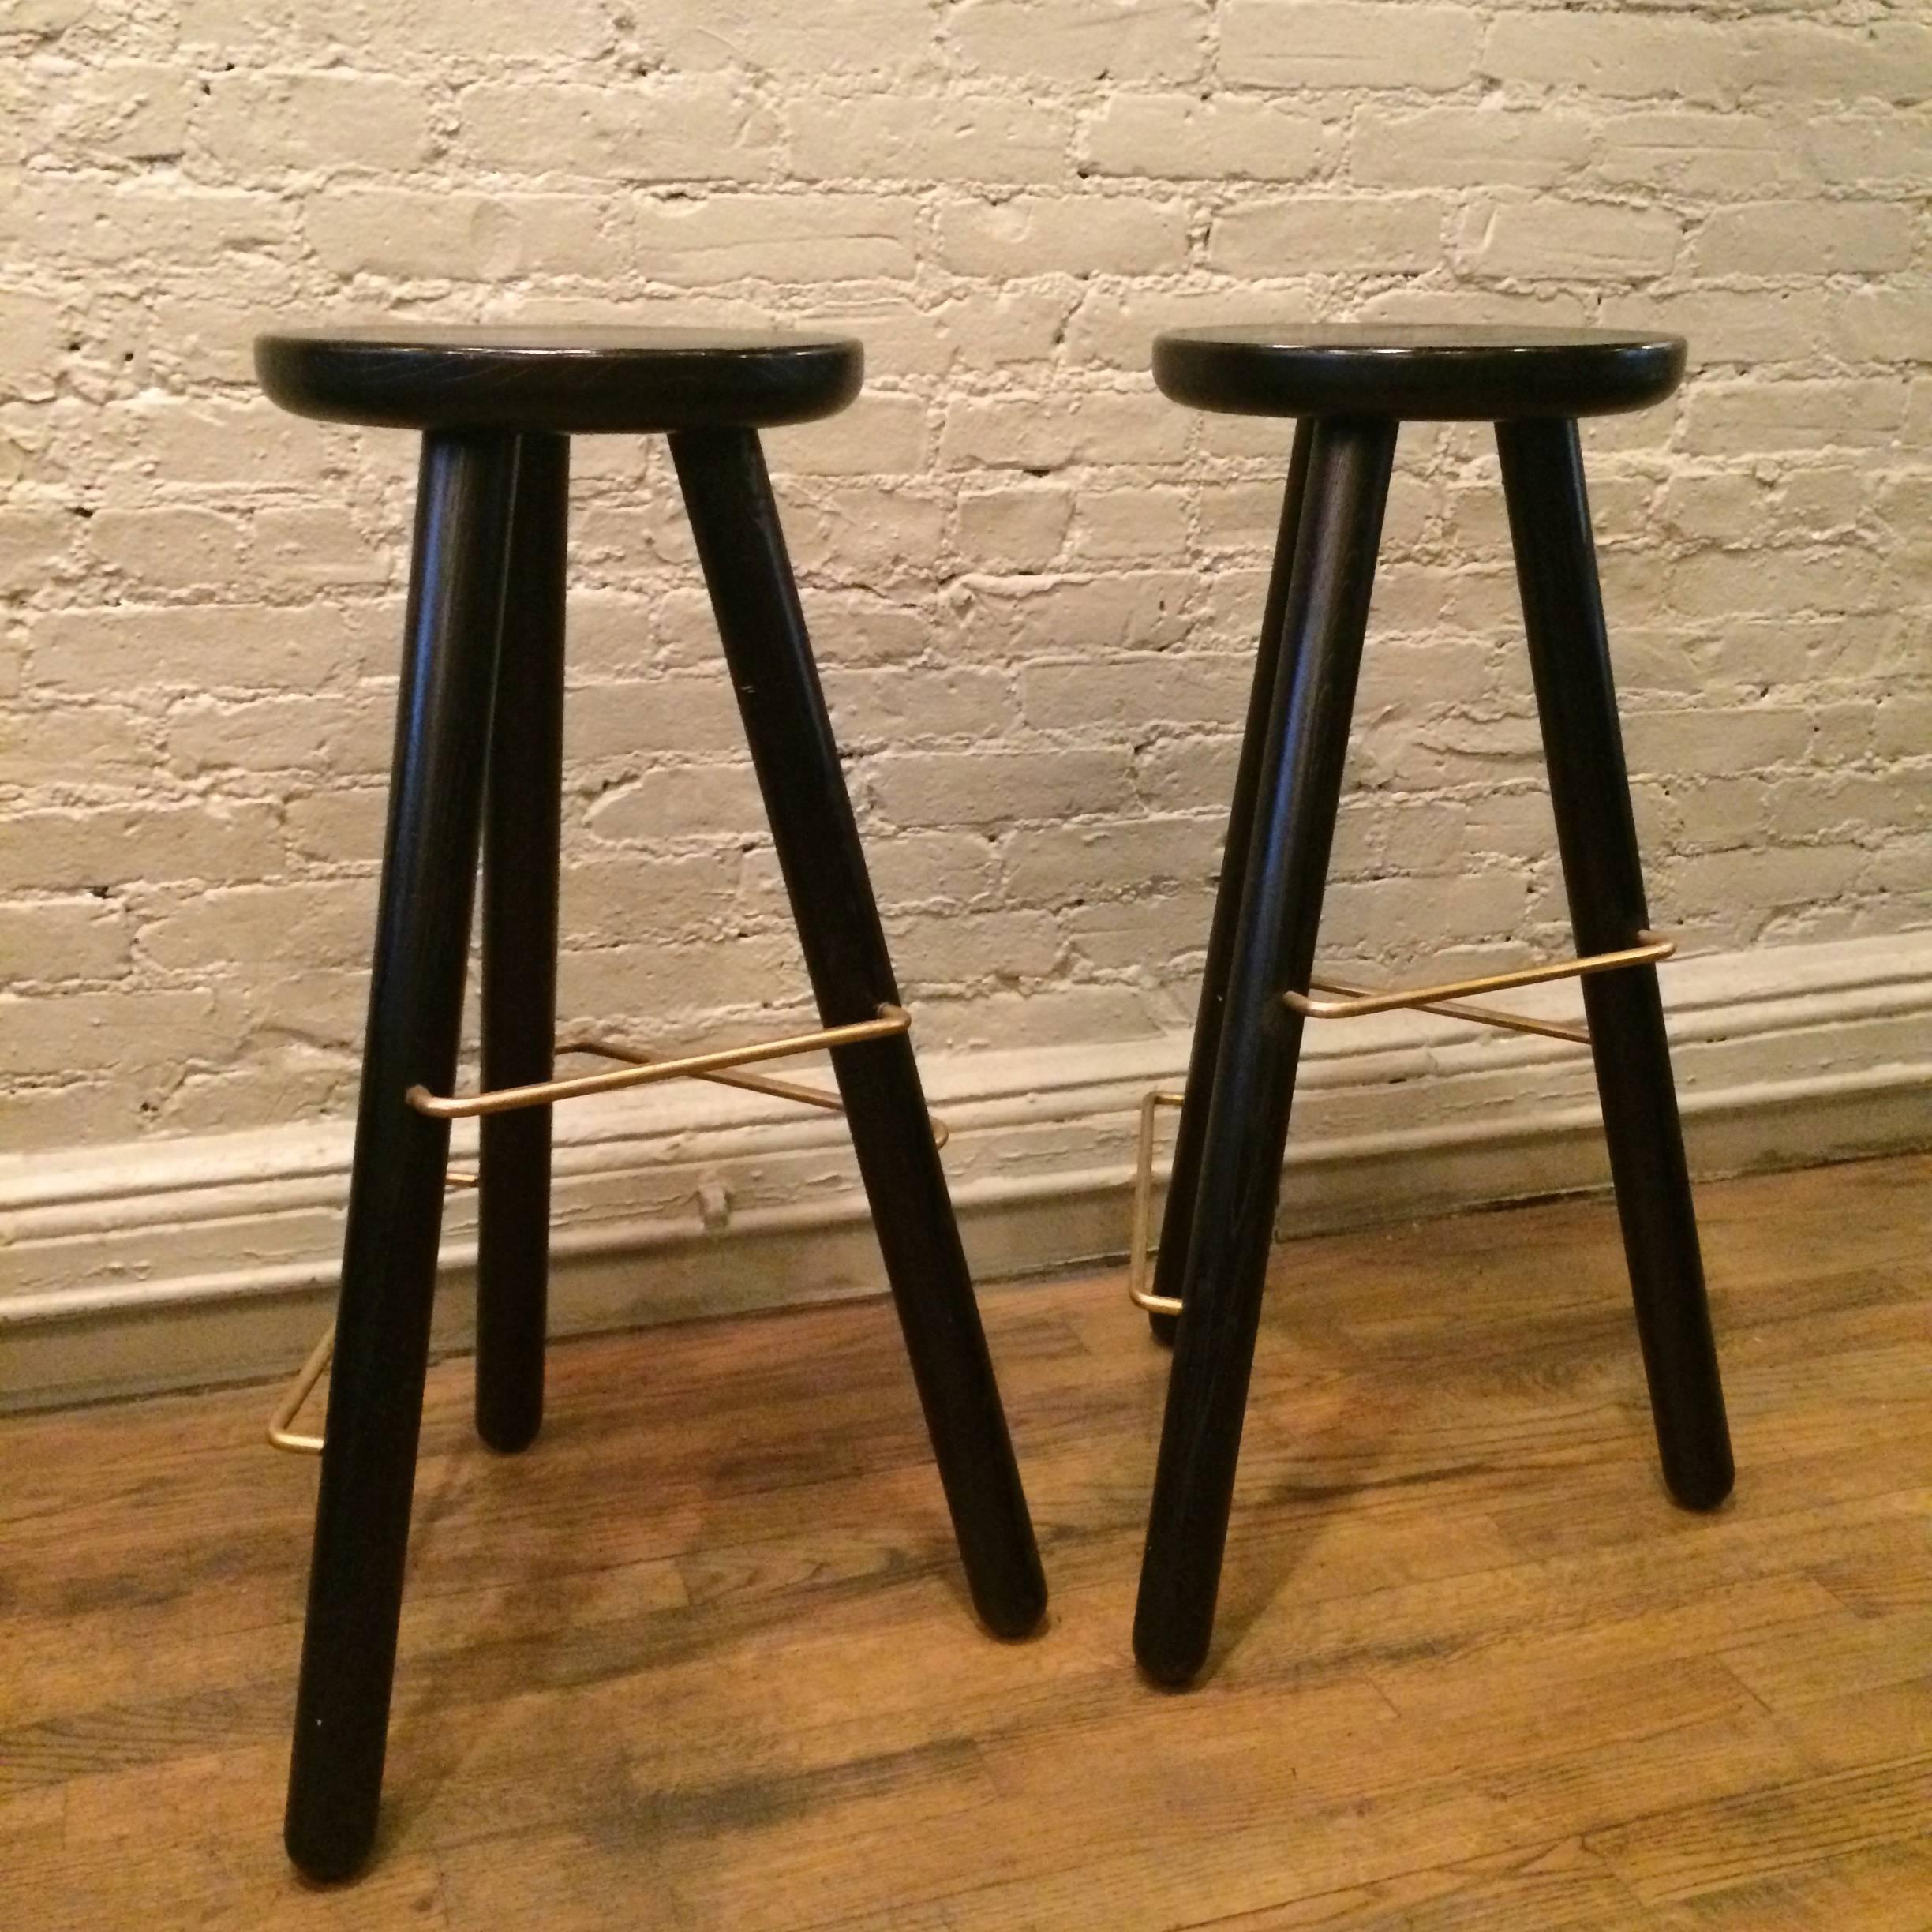 Contemporary, modernist, limited edition, ash wood bar stool in an ebonized finish with three graduated, brass footrest hand-crafted in the UK, only one available.

Measure:30